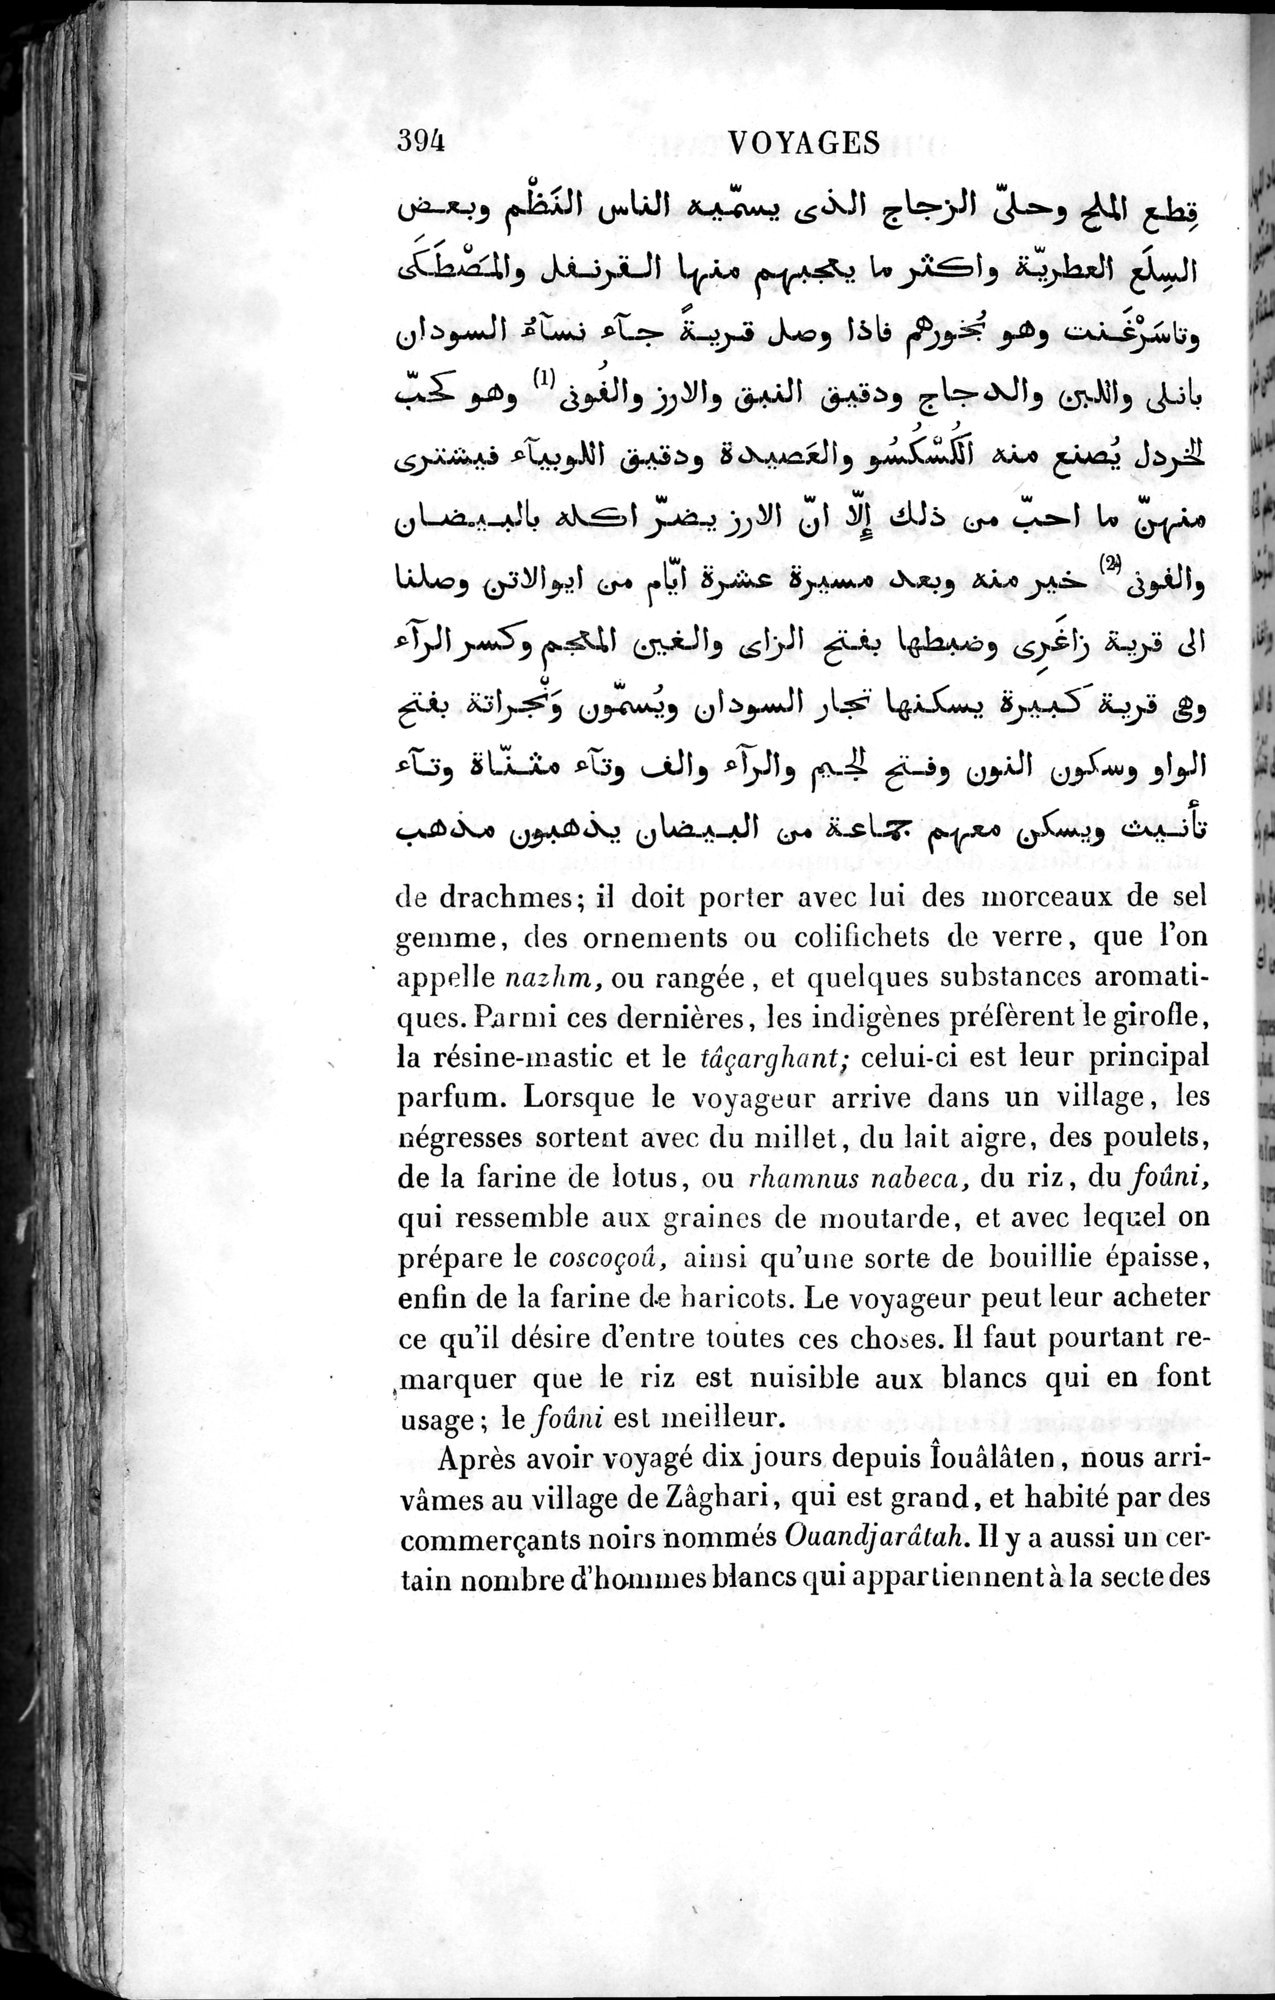 Voyages d'Ibn Batoutah : vol.4 / Page 406 (Grayscale High Resolution Image)